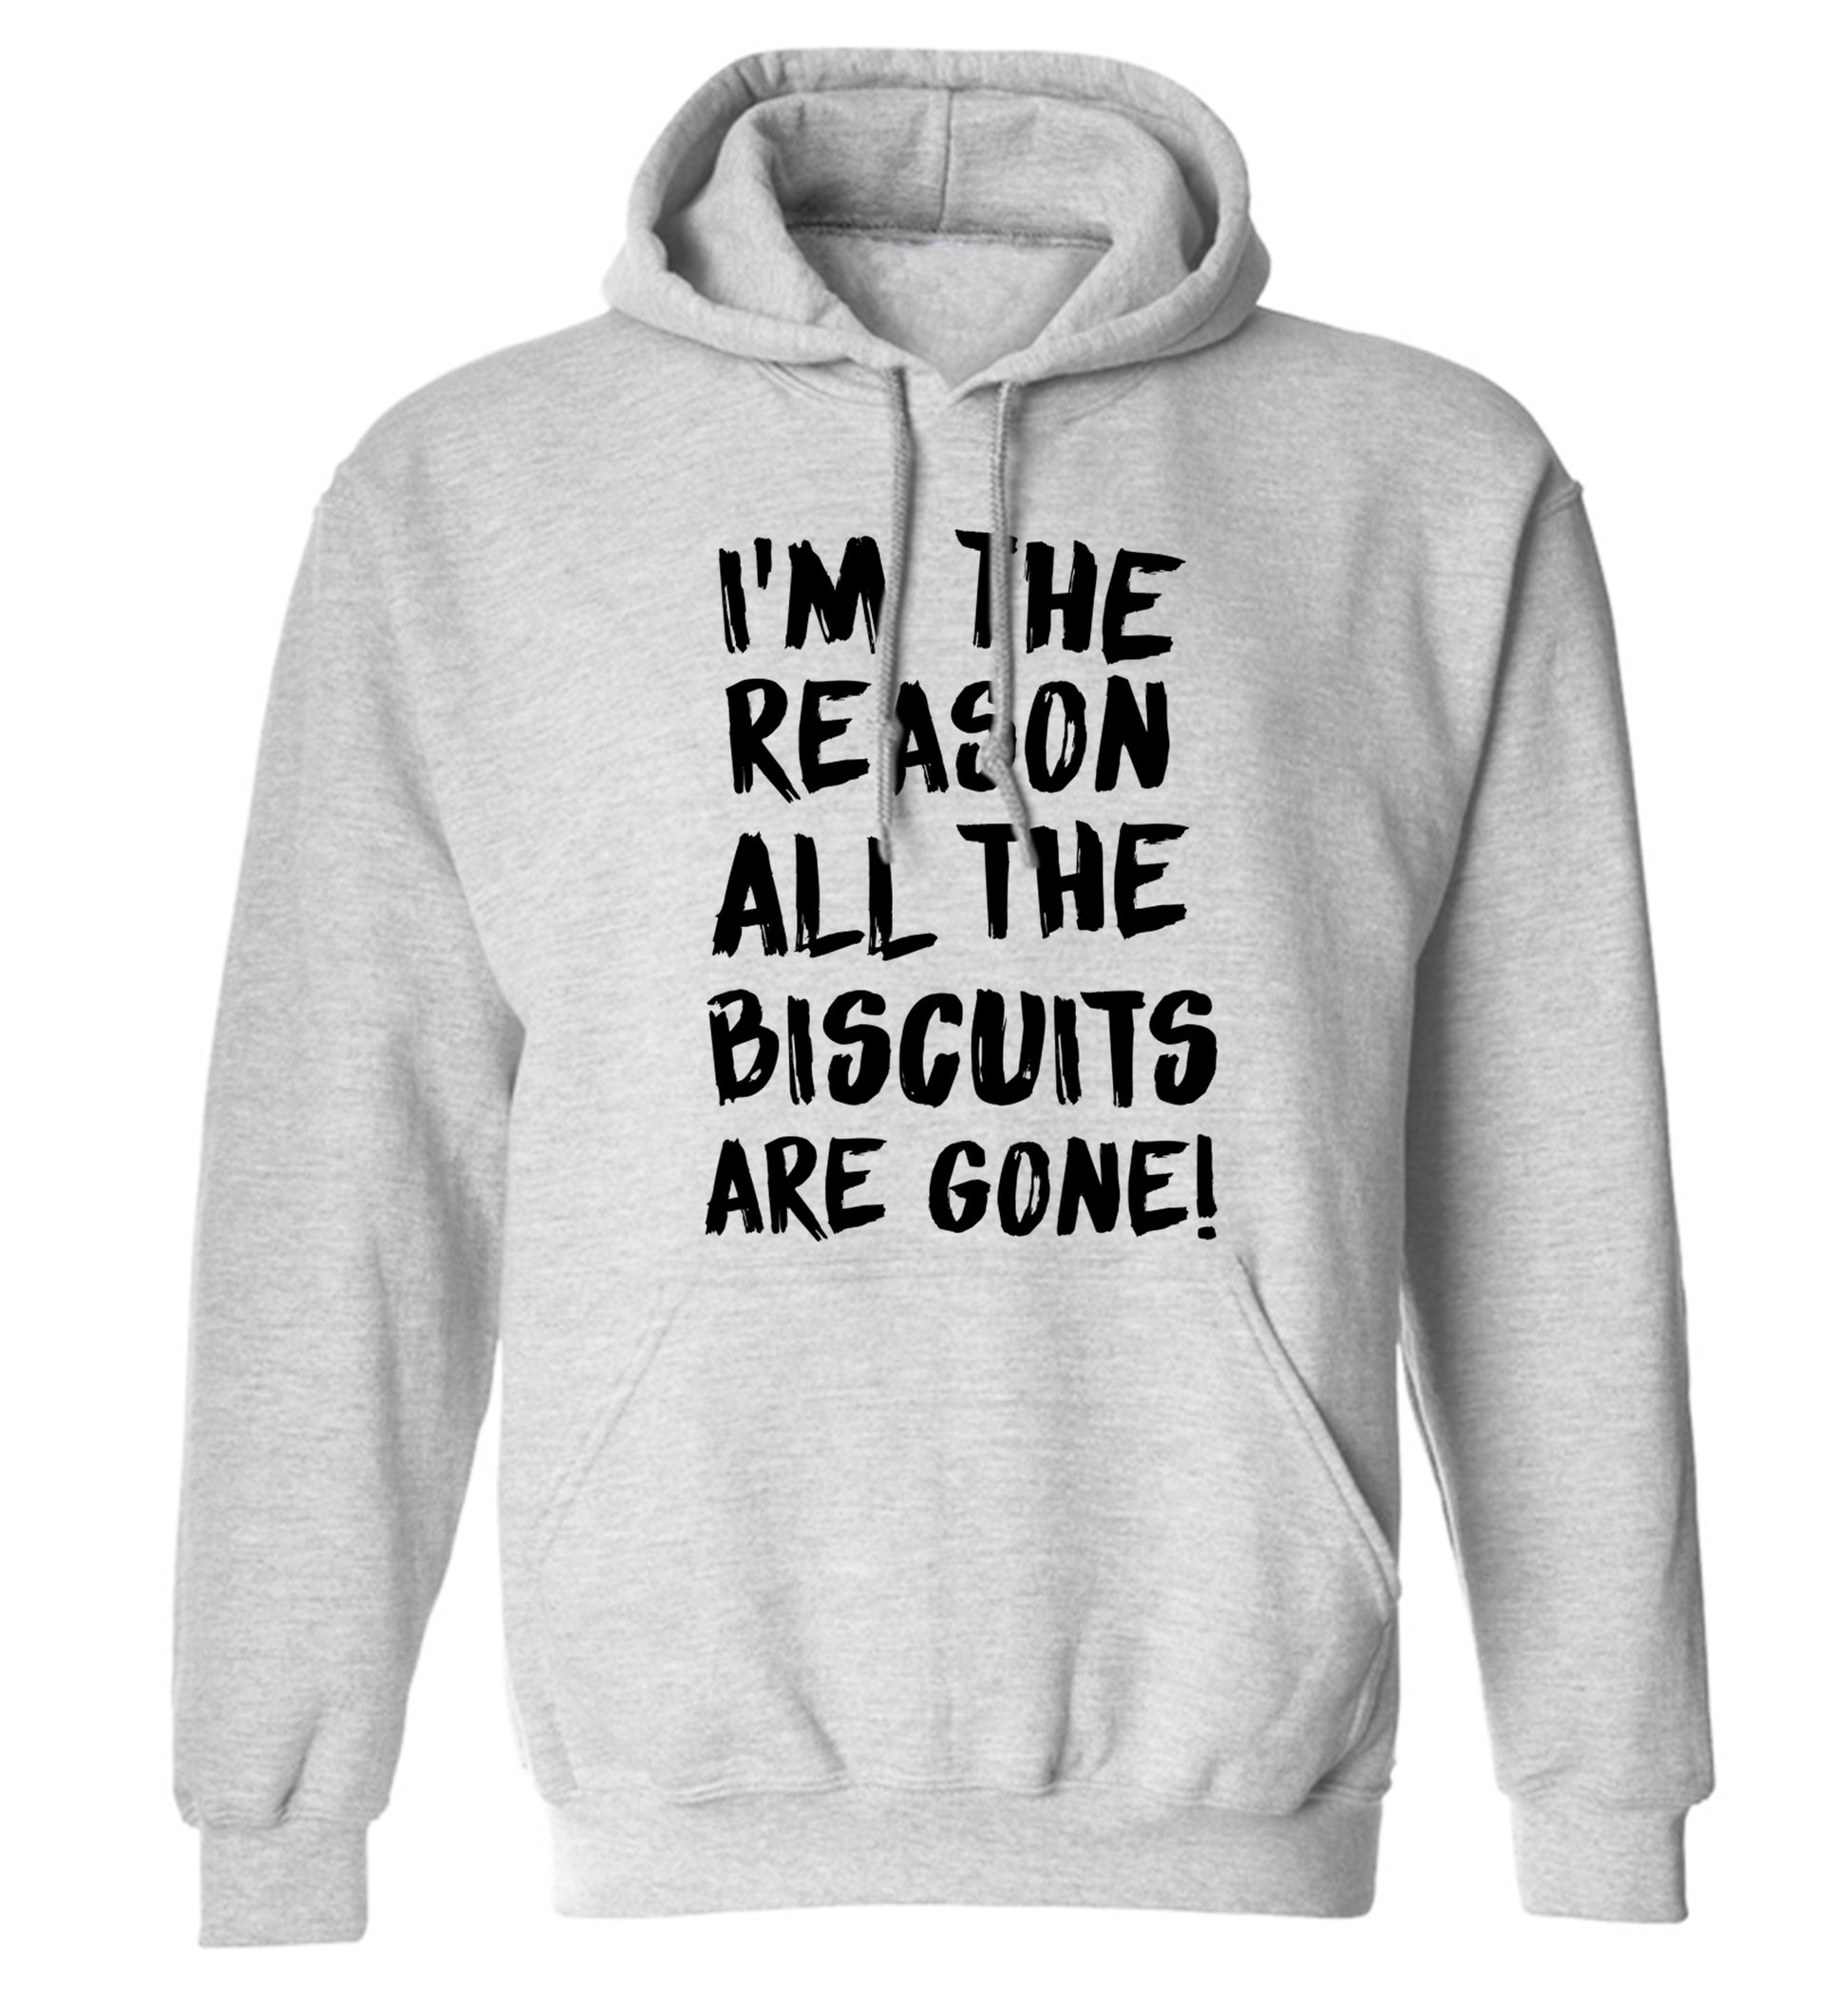 I'm the reason why all the biscuits are gone adults unisex grey hoodie 2XL